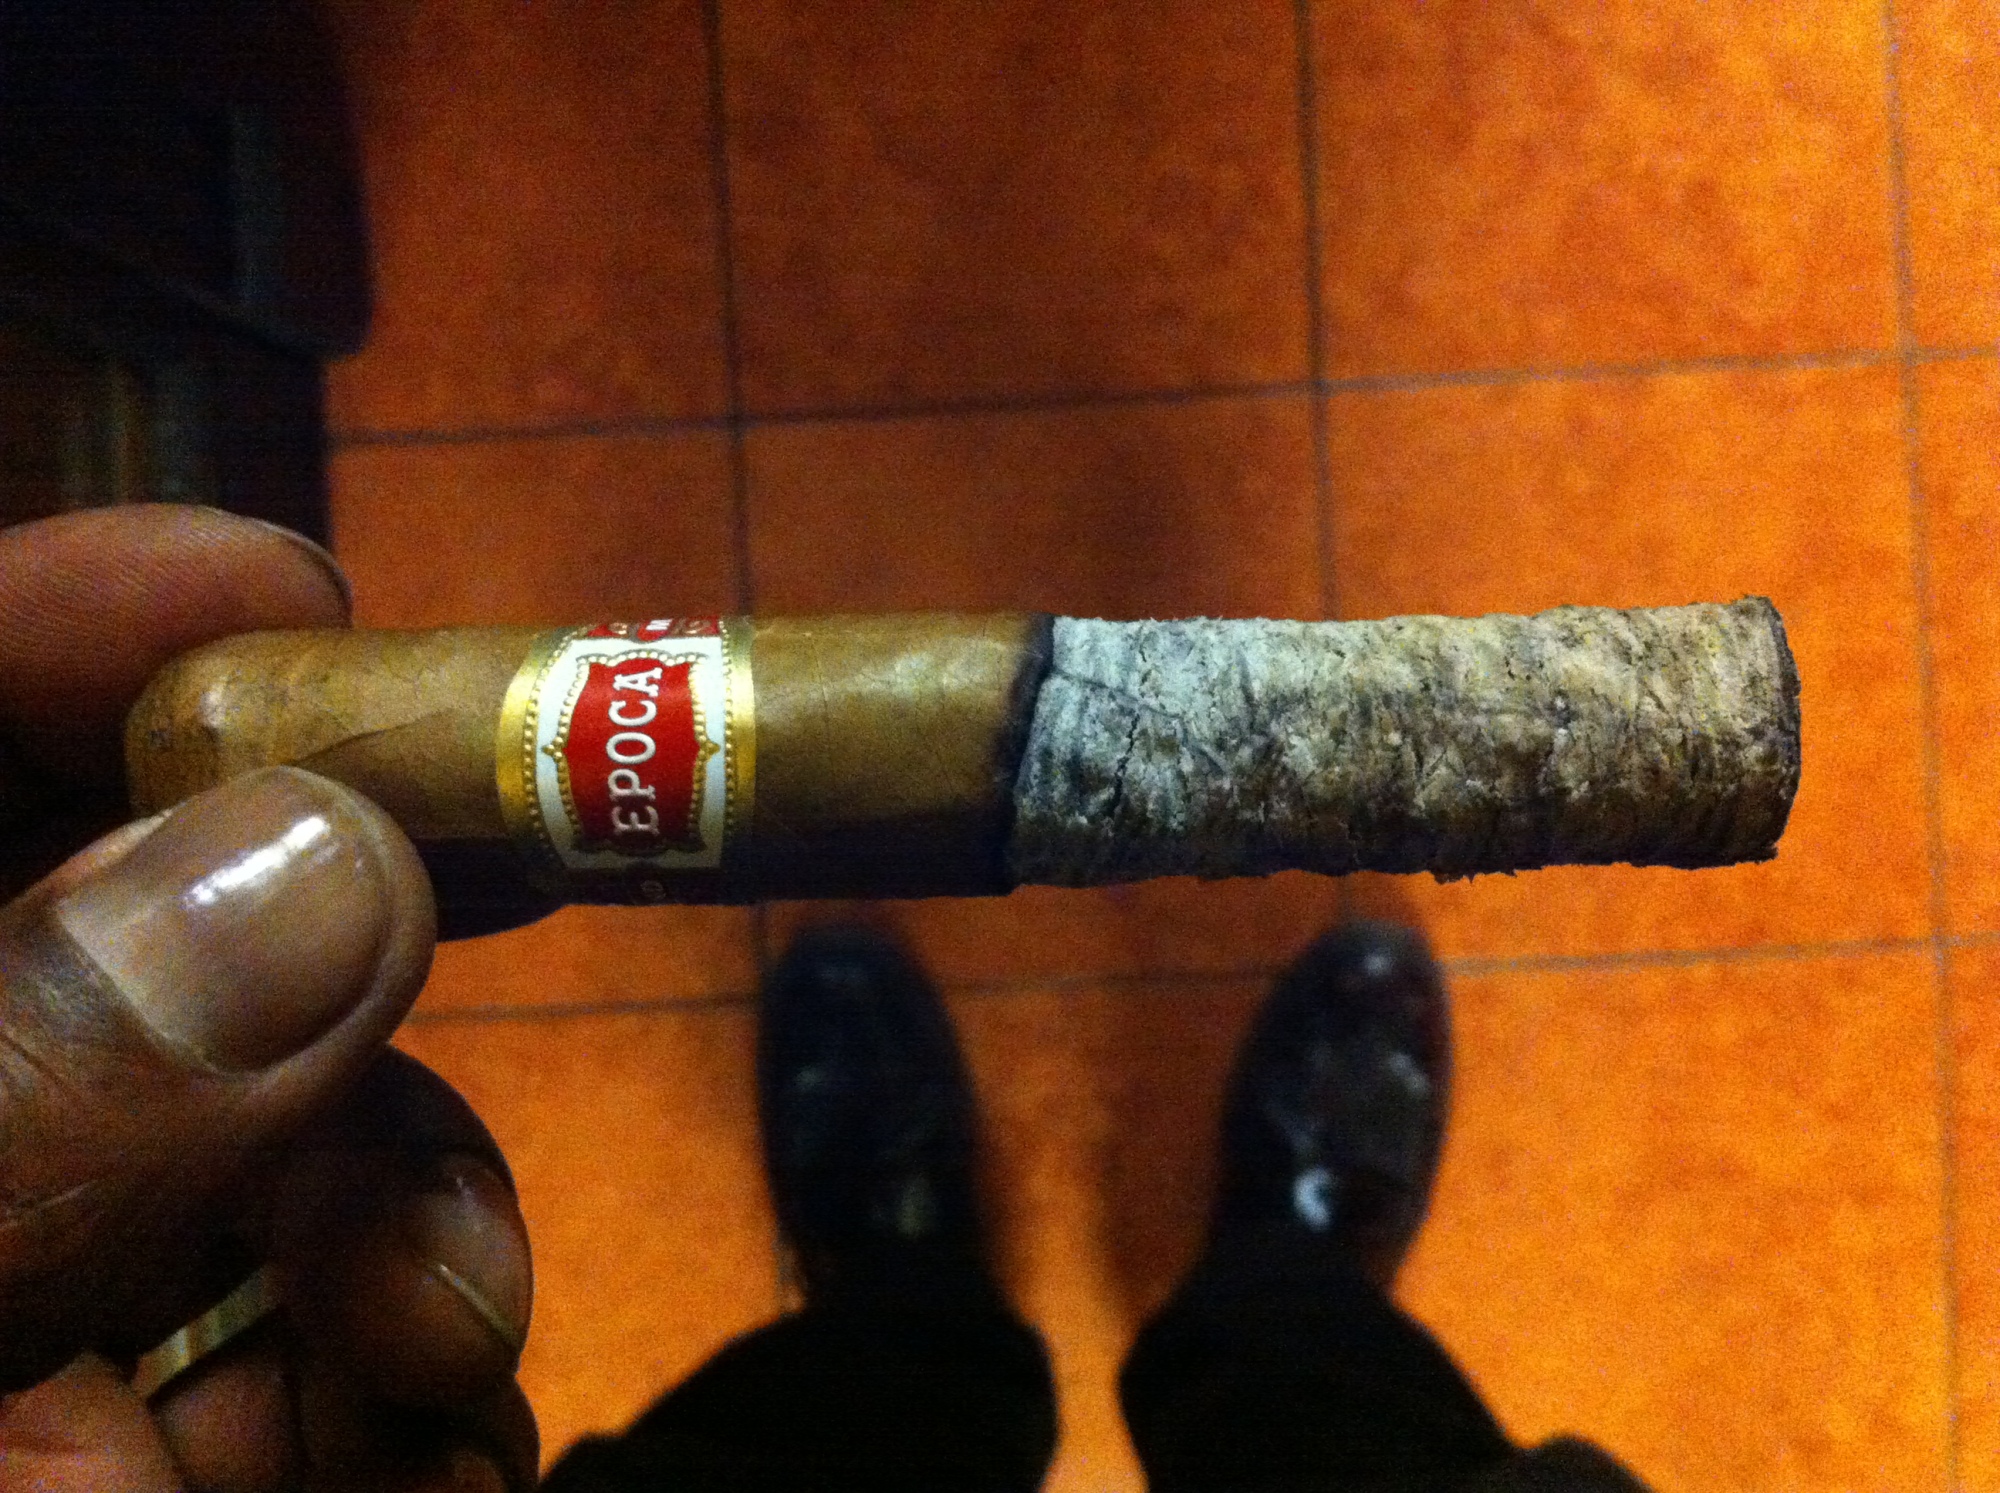 Ashes of a Nicaraguan Dominican blend, in a wrapper from Ecuador / Nat Sherman, New York, NY / iPhone 4